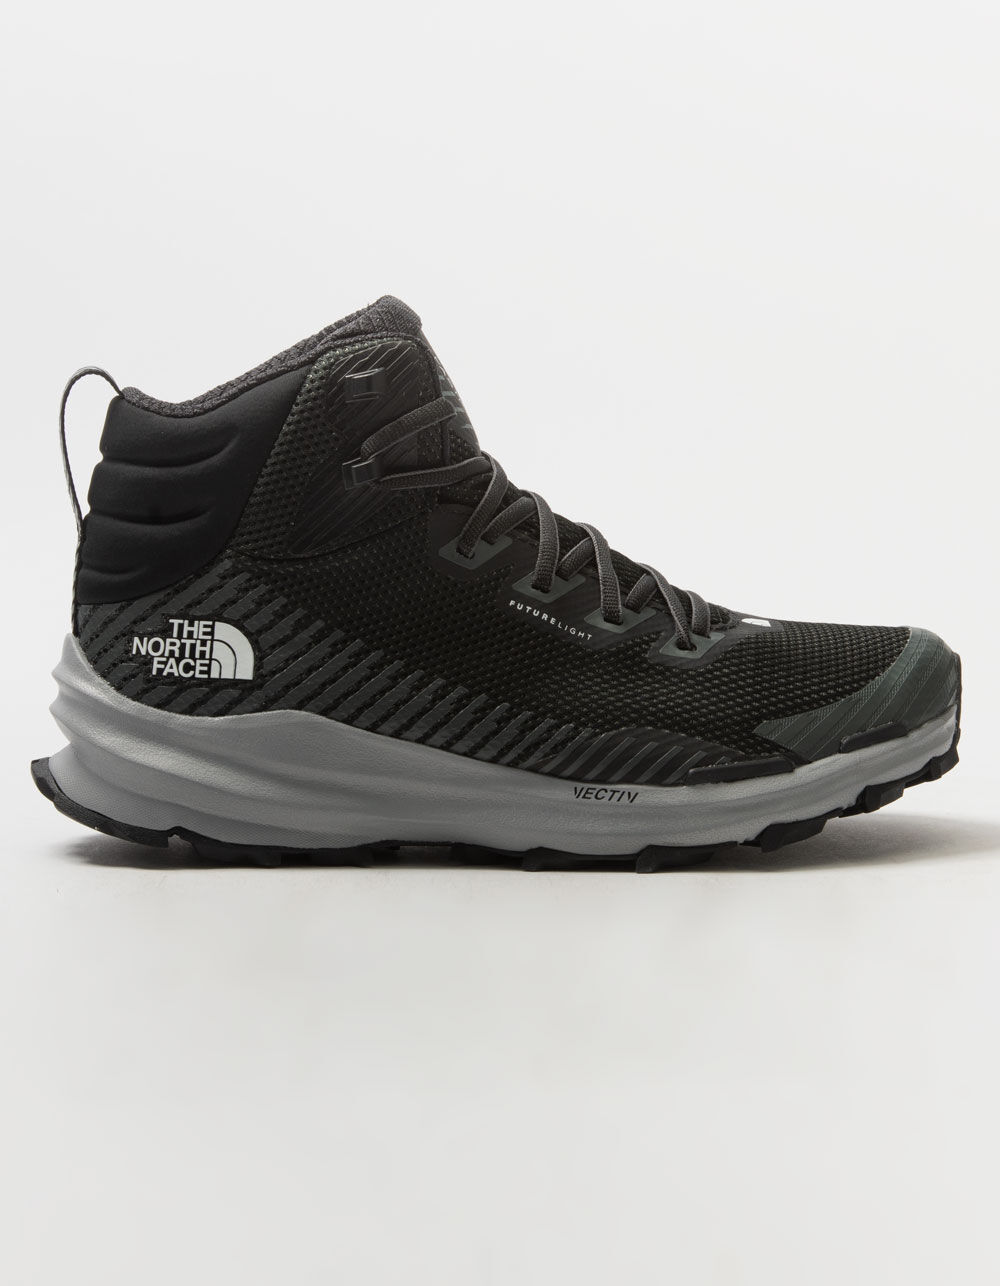 THE NORTH FACE Vectiv™ Fastpack Mid Futurelight™ Mens Boots - BLACK ...